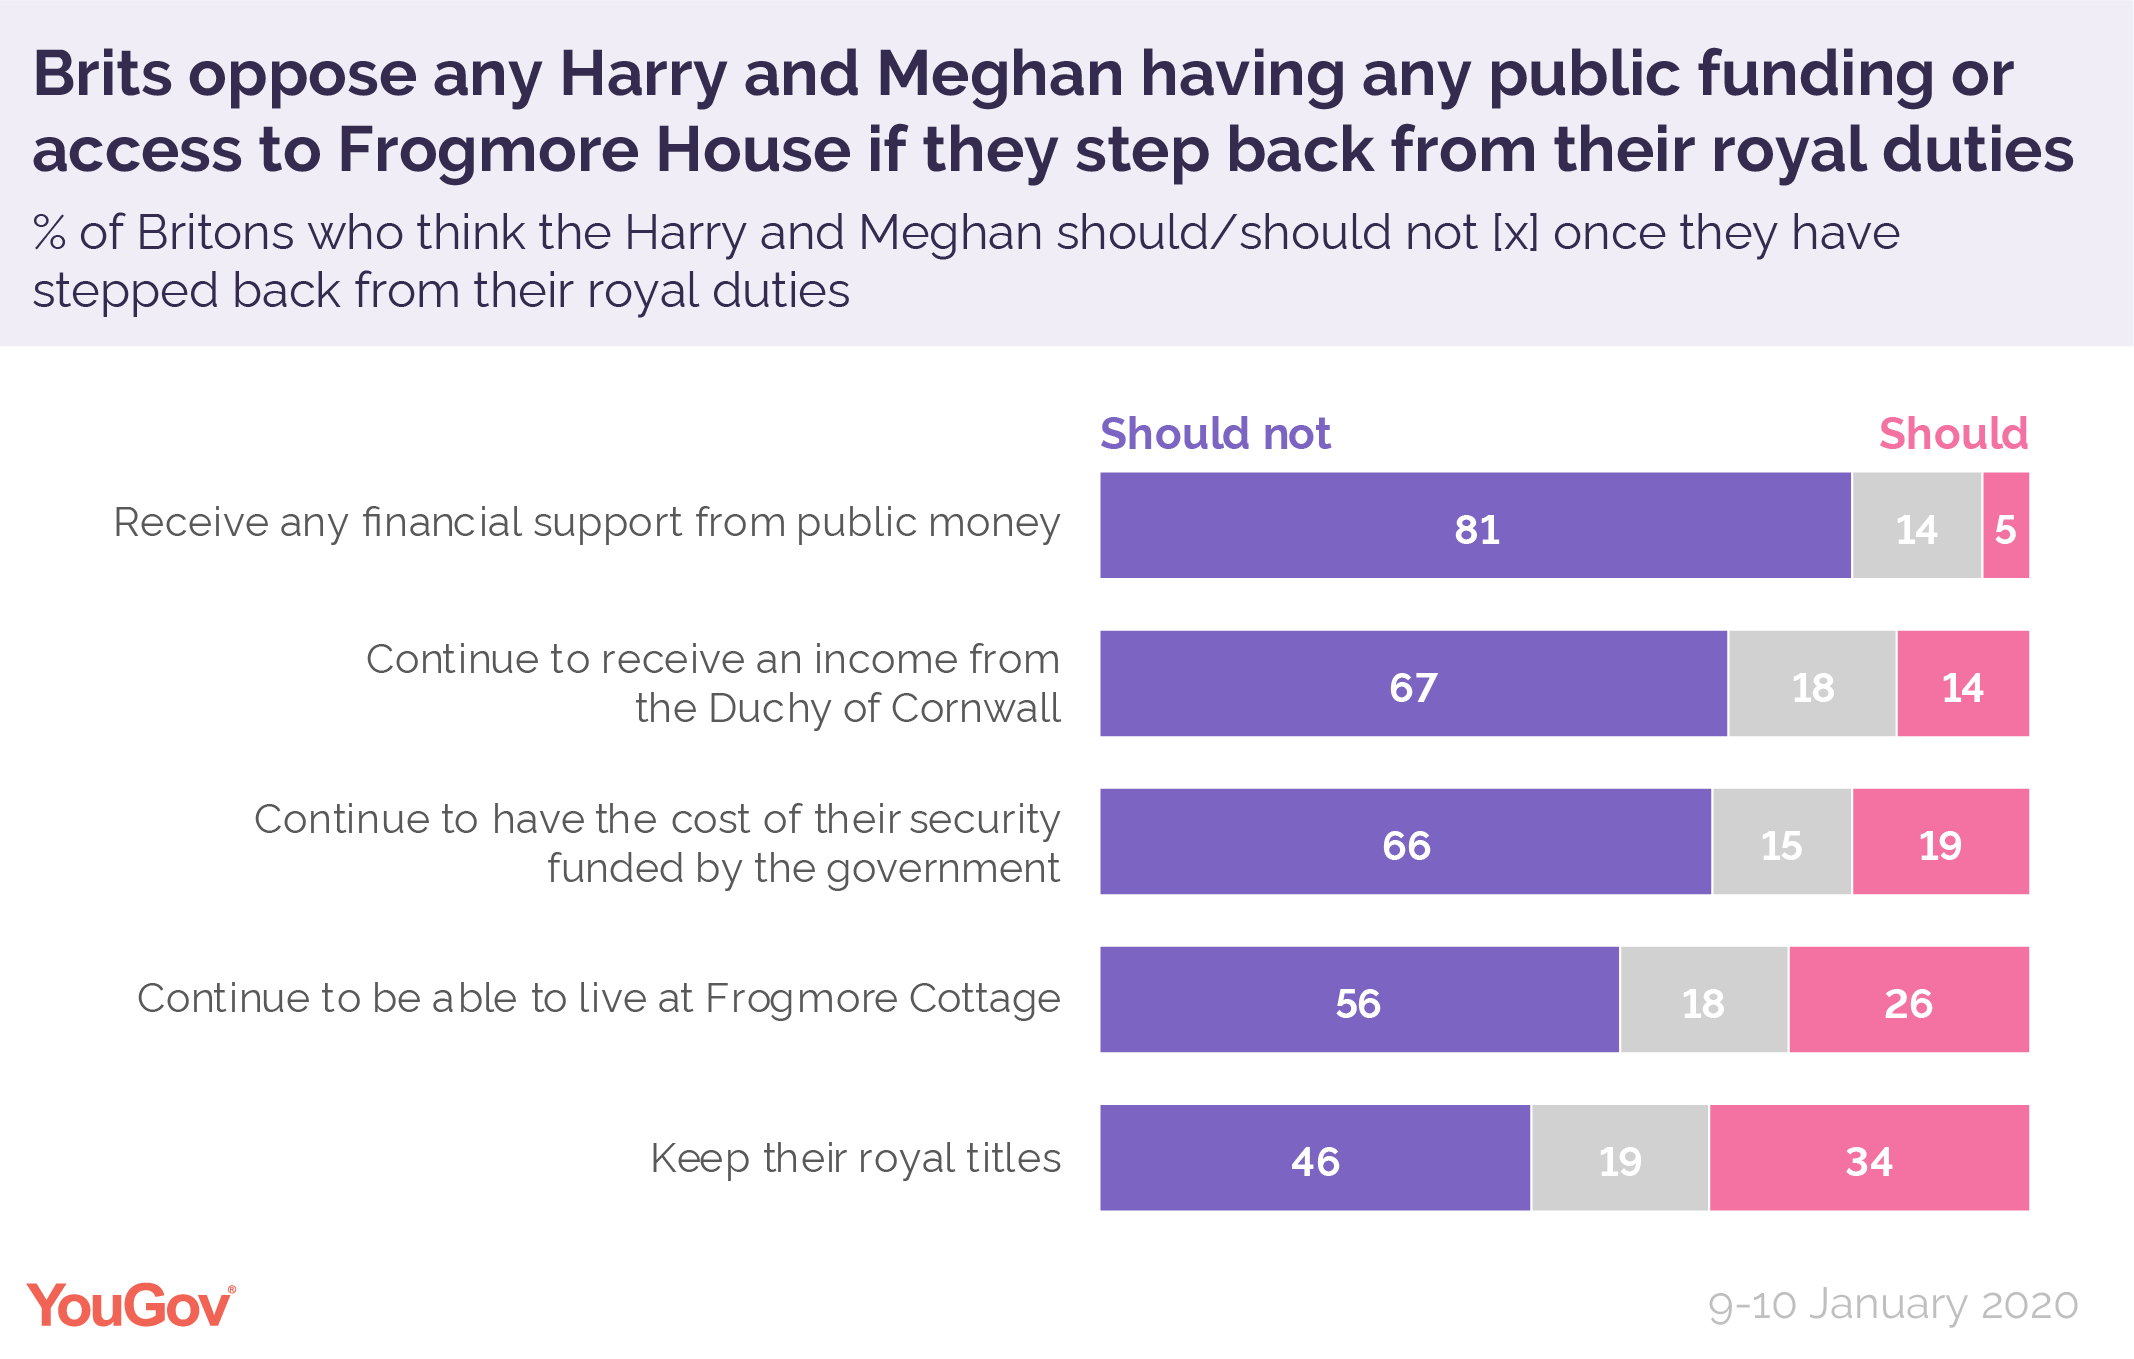 Brits%20oppose%20money%20for%20Harry%20and%20Meghan-01.png